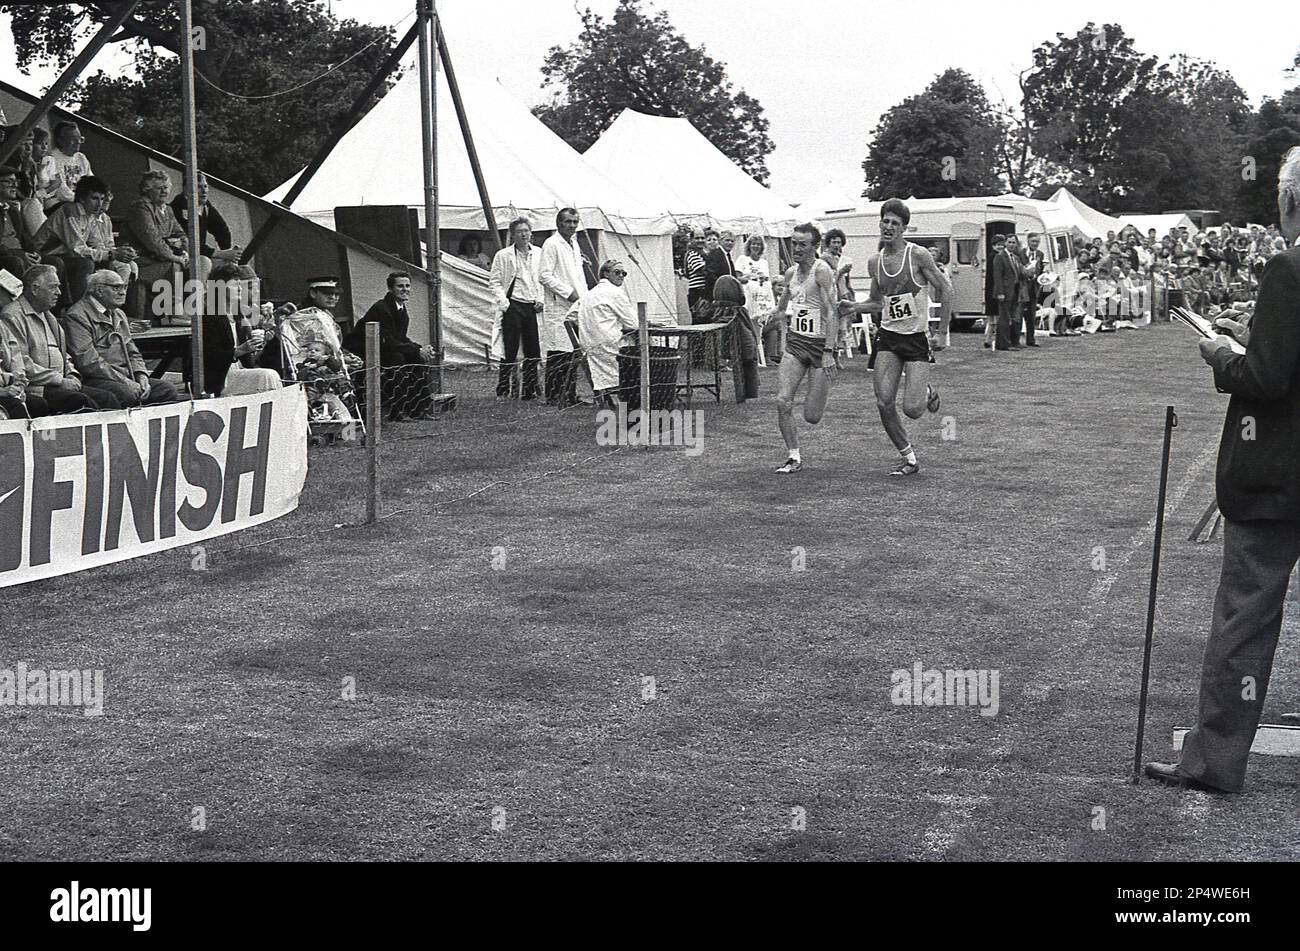 1989, a close finish of a park running race, England, UK....picture shows two male athletes sprintings side by side each other to reach the finishing line first and claim victory. Stock Photo